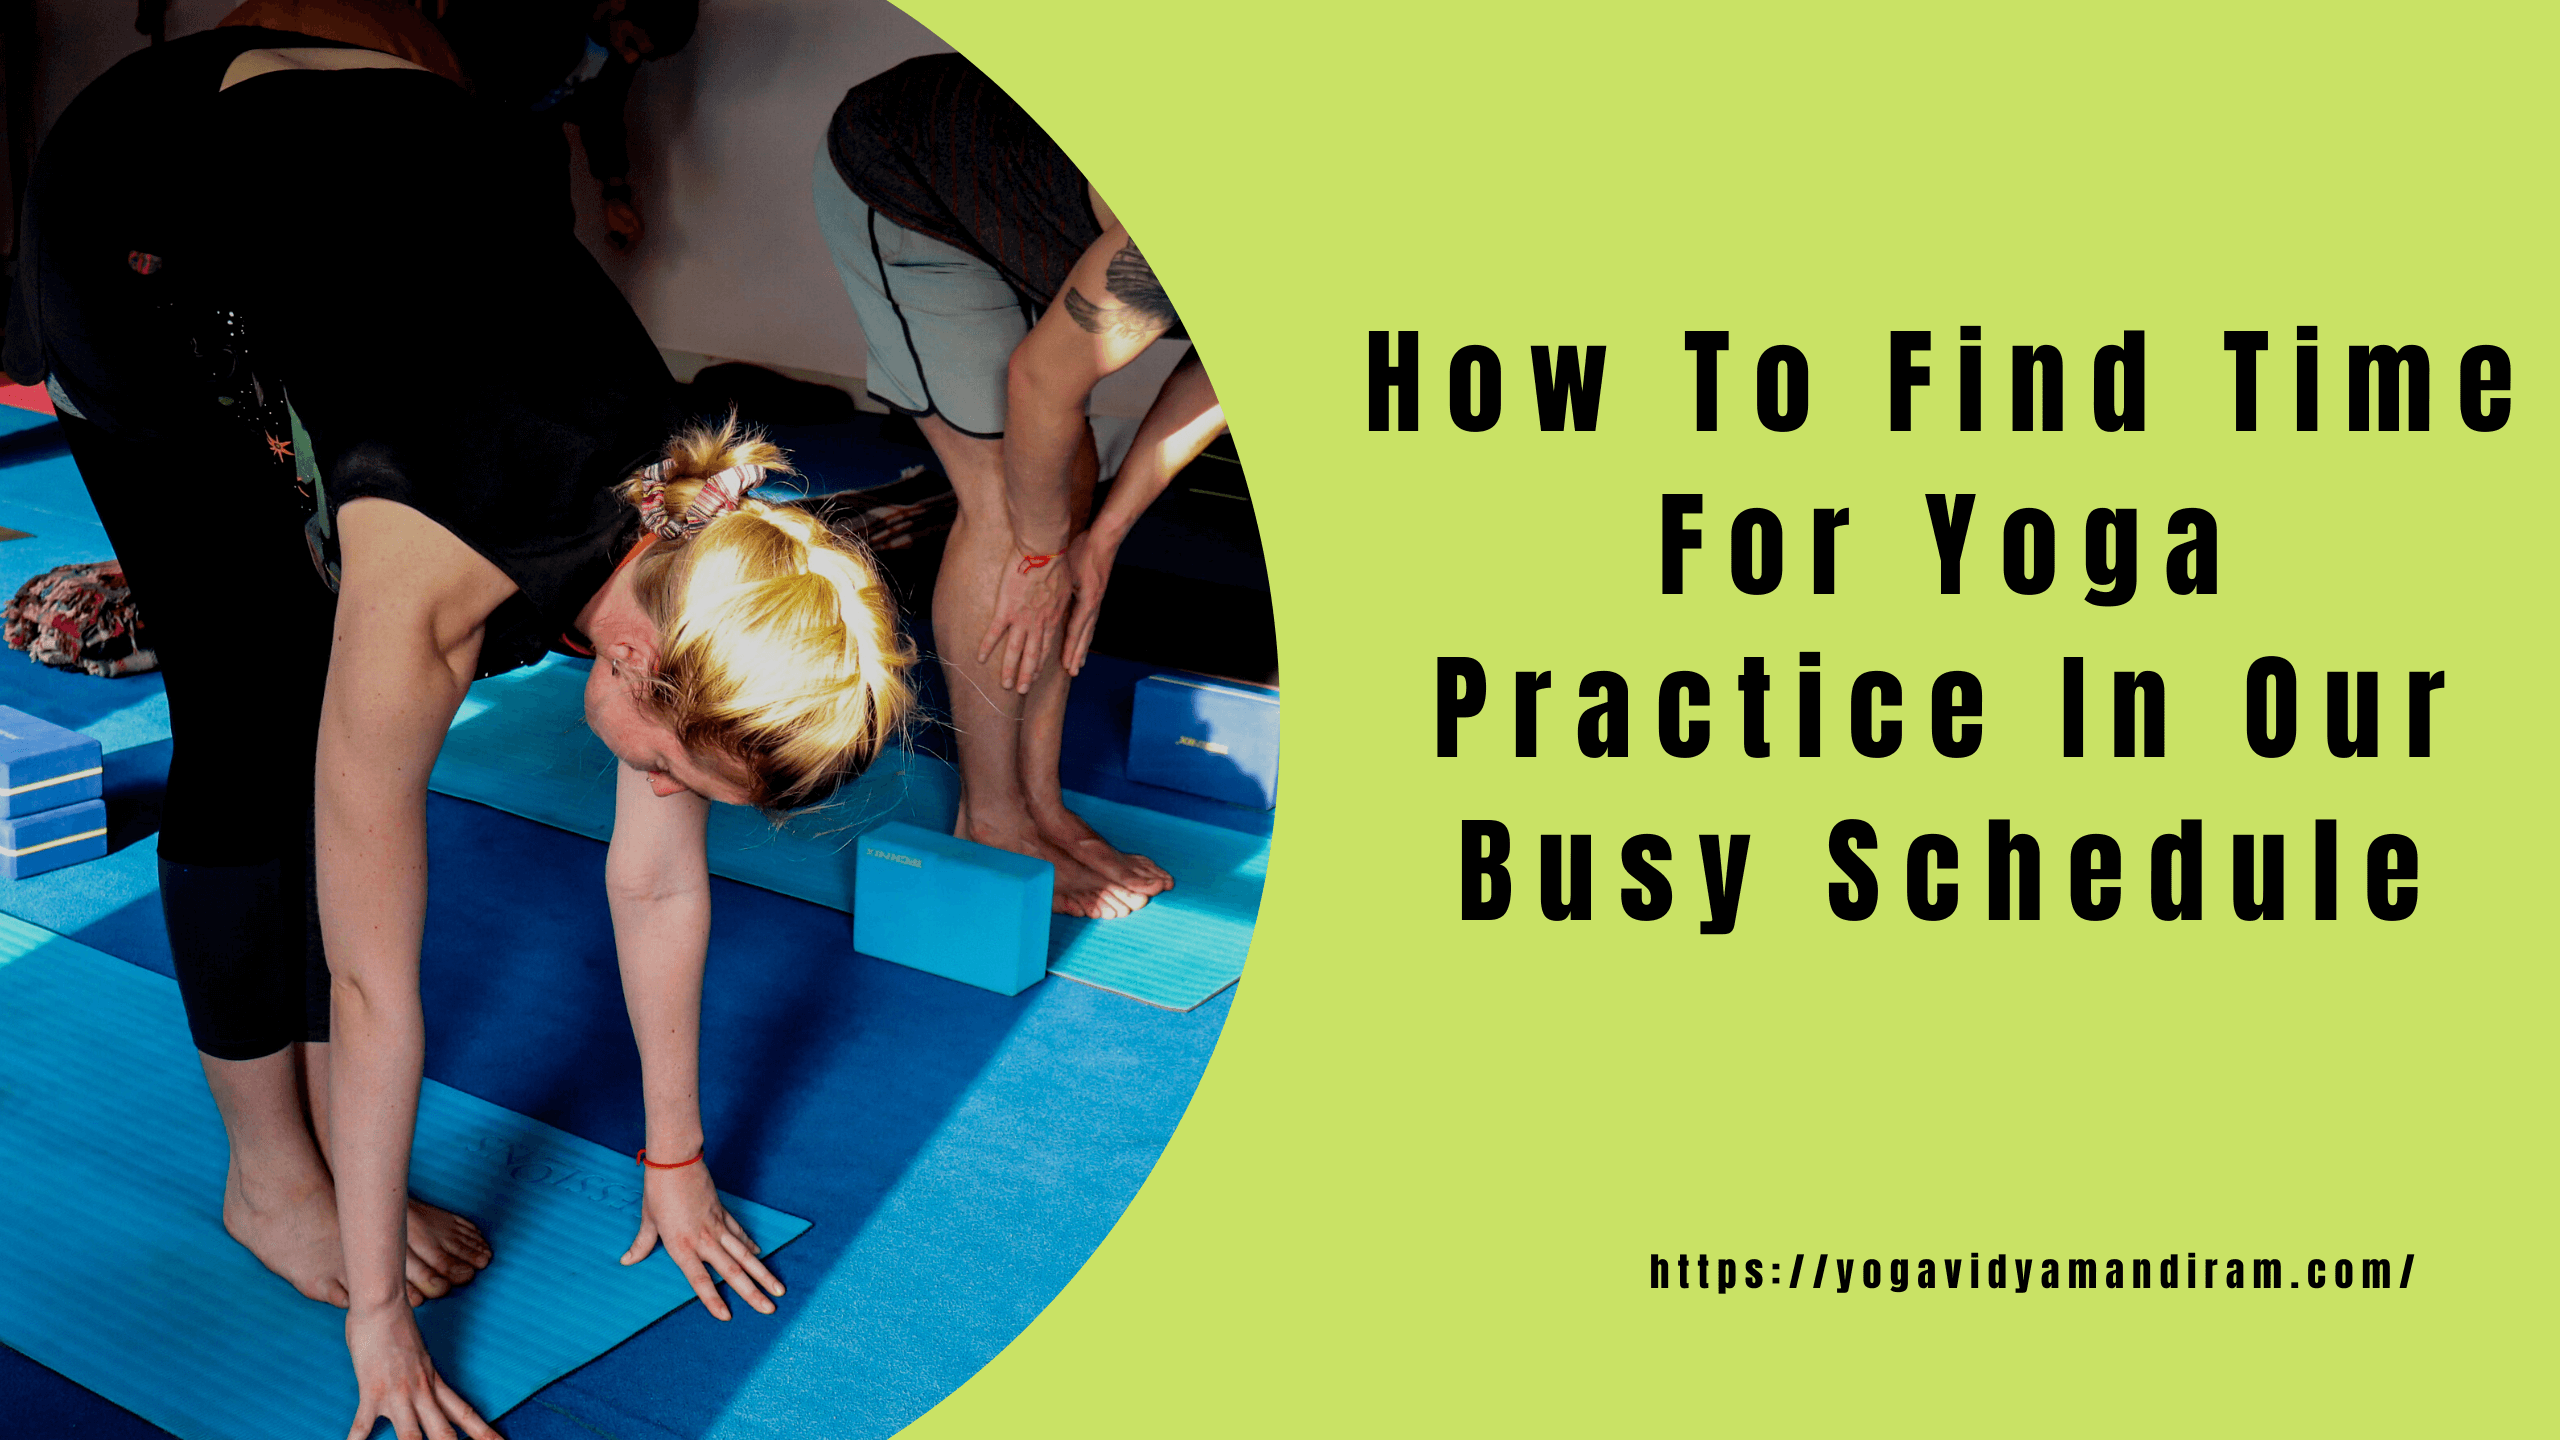 How To Find Time For Yoga Practice In Our Busy Schedule